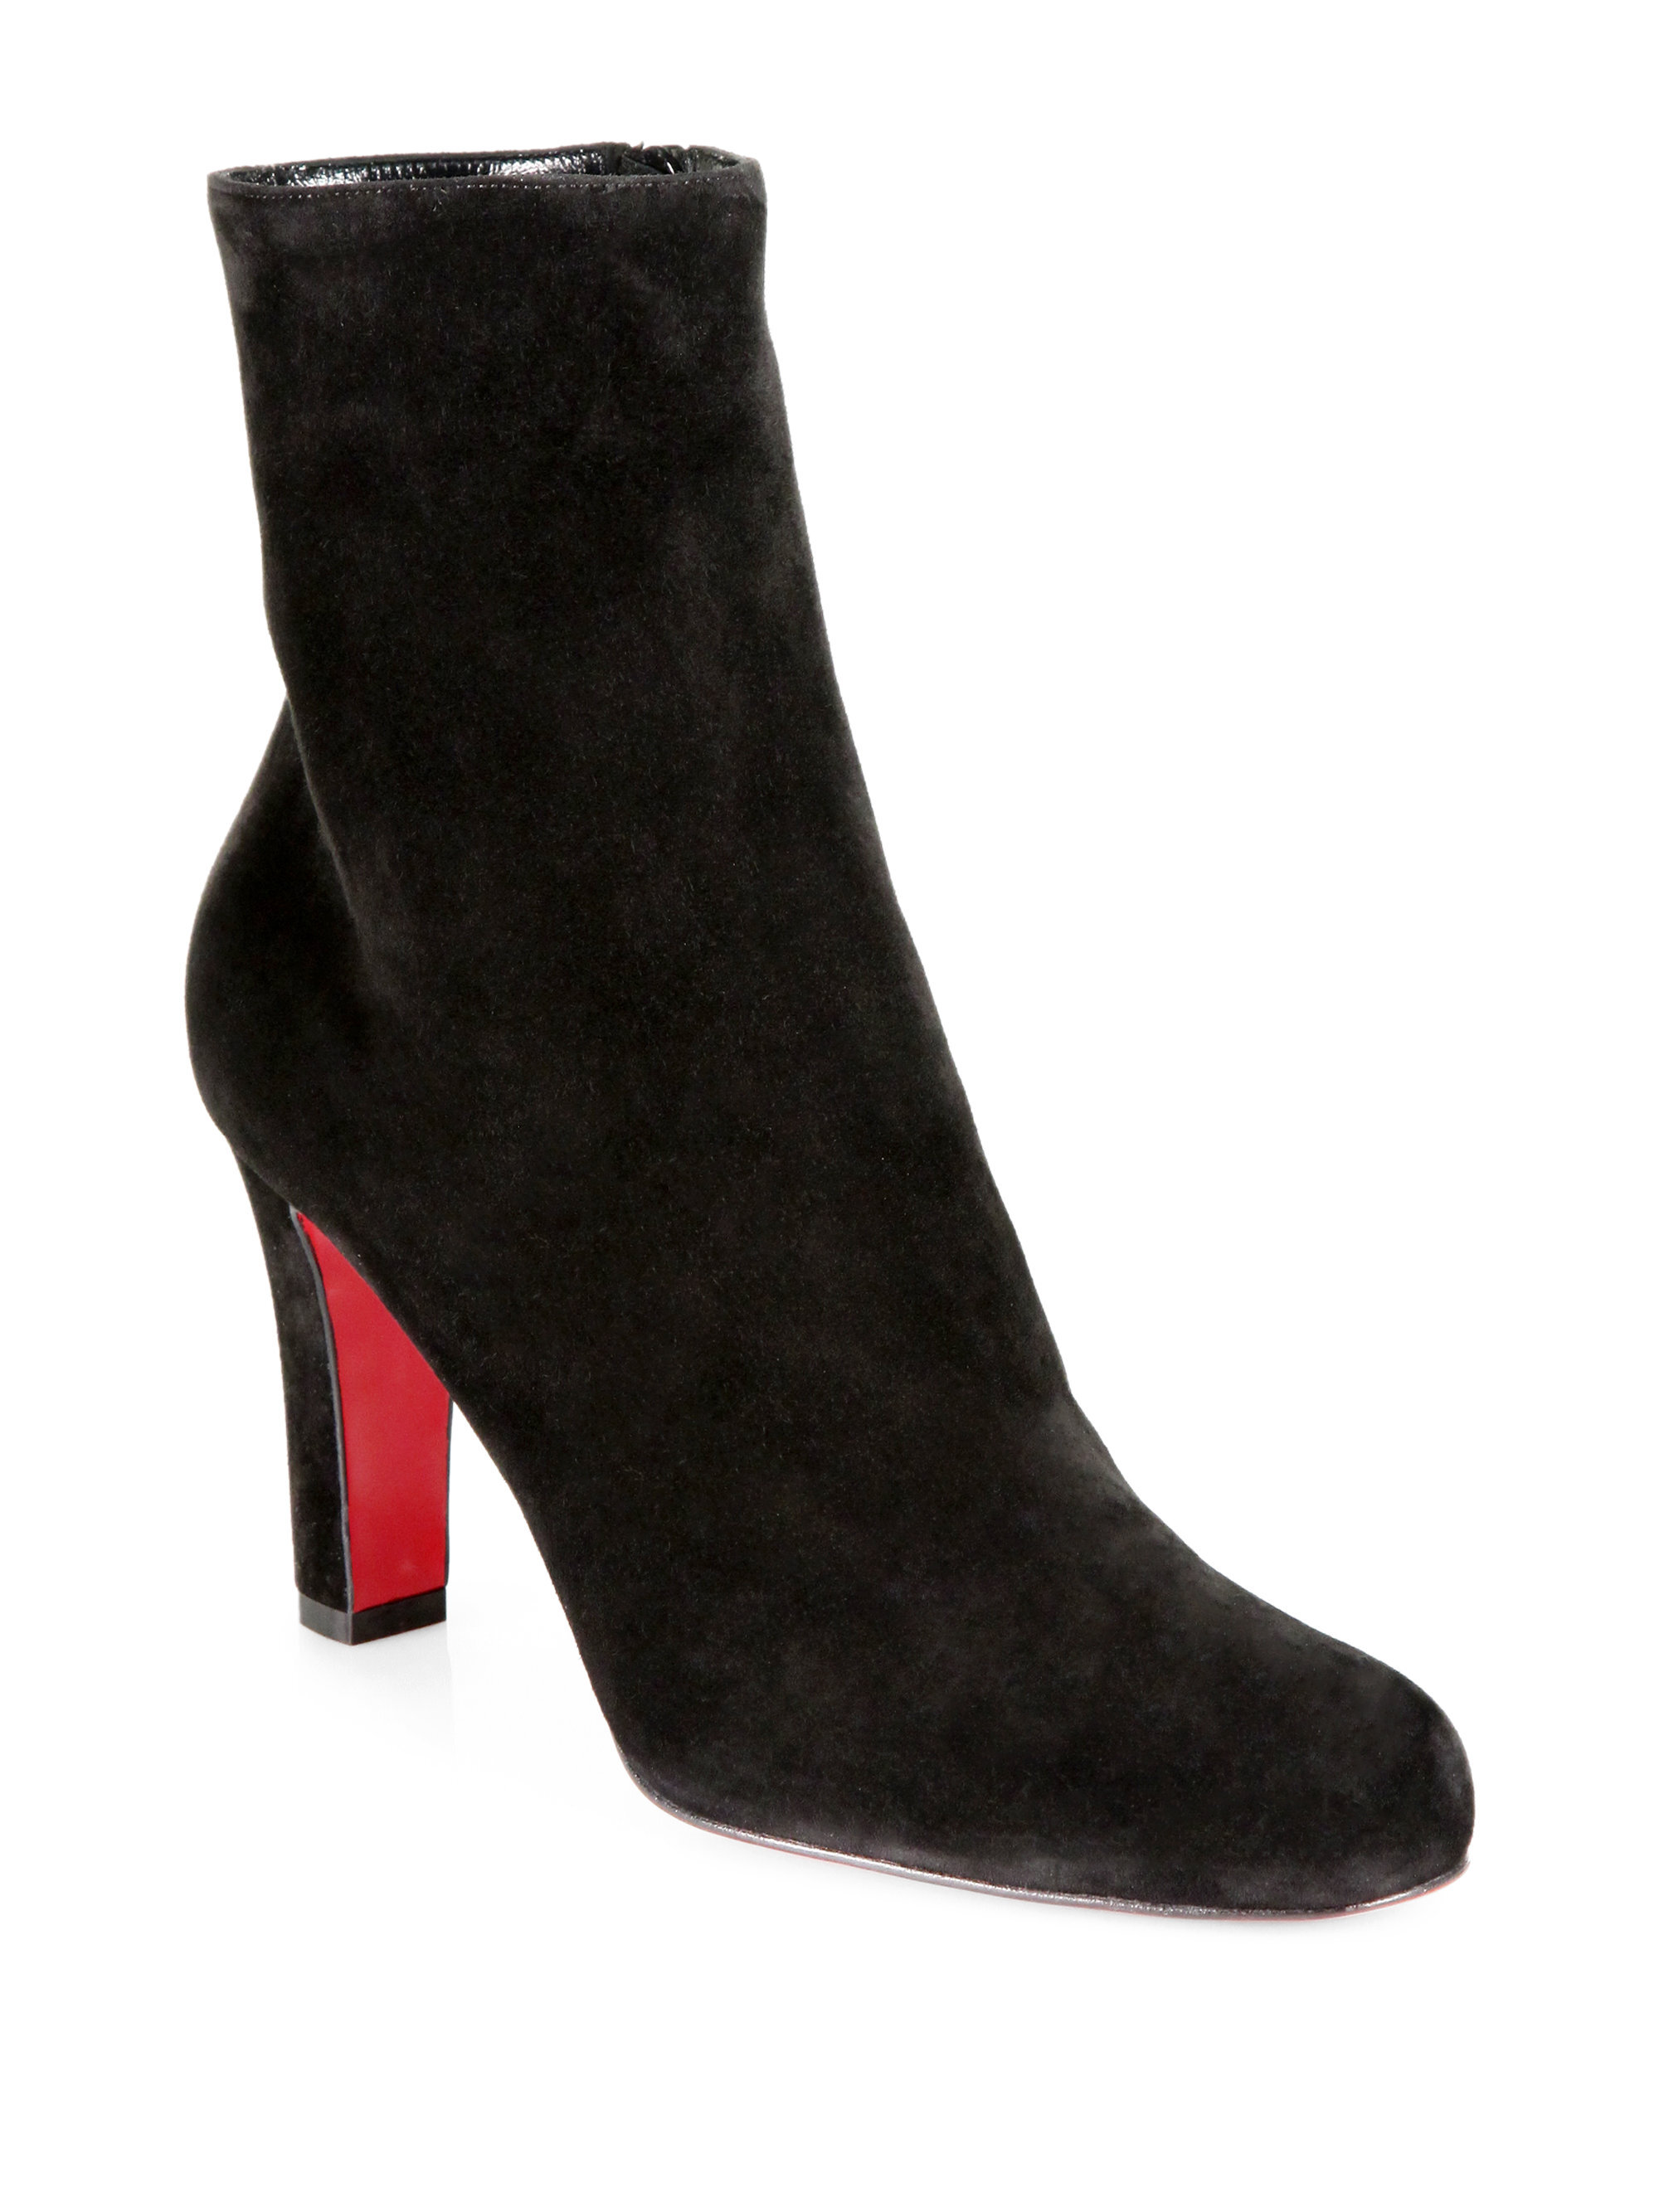 Christian Louboutin Miss Tack Boots in Black Suede.jpg